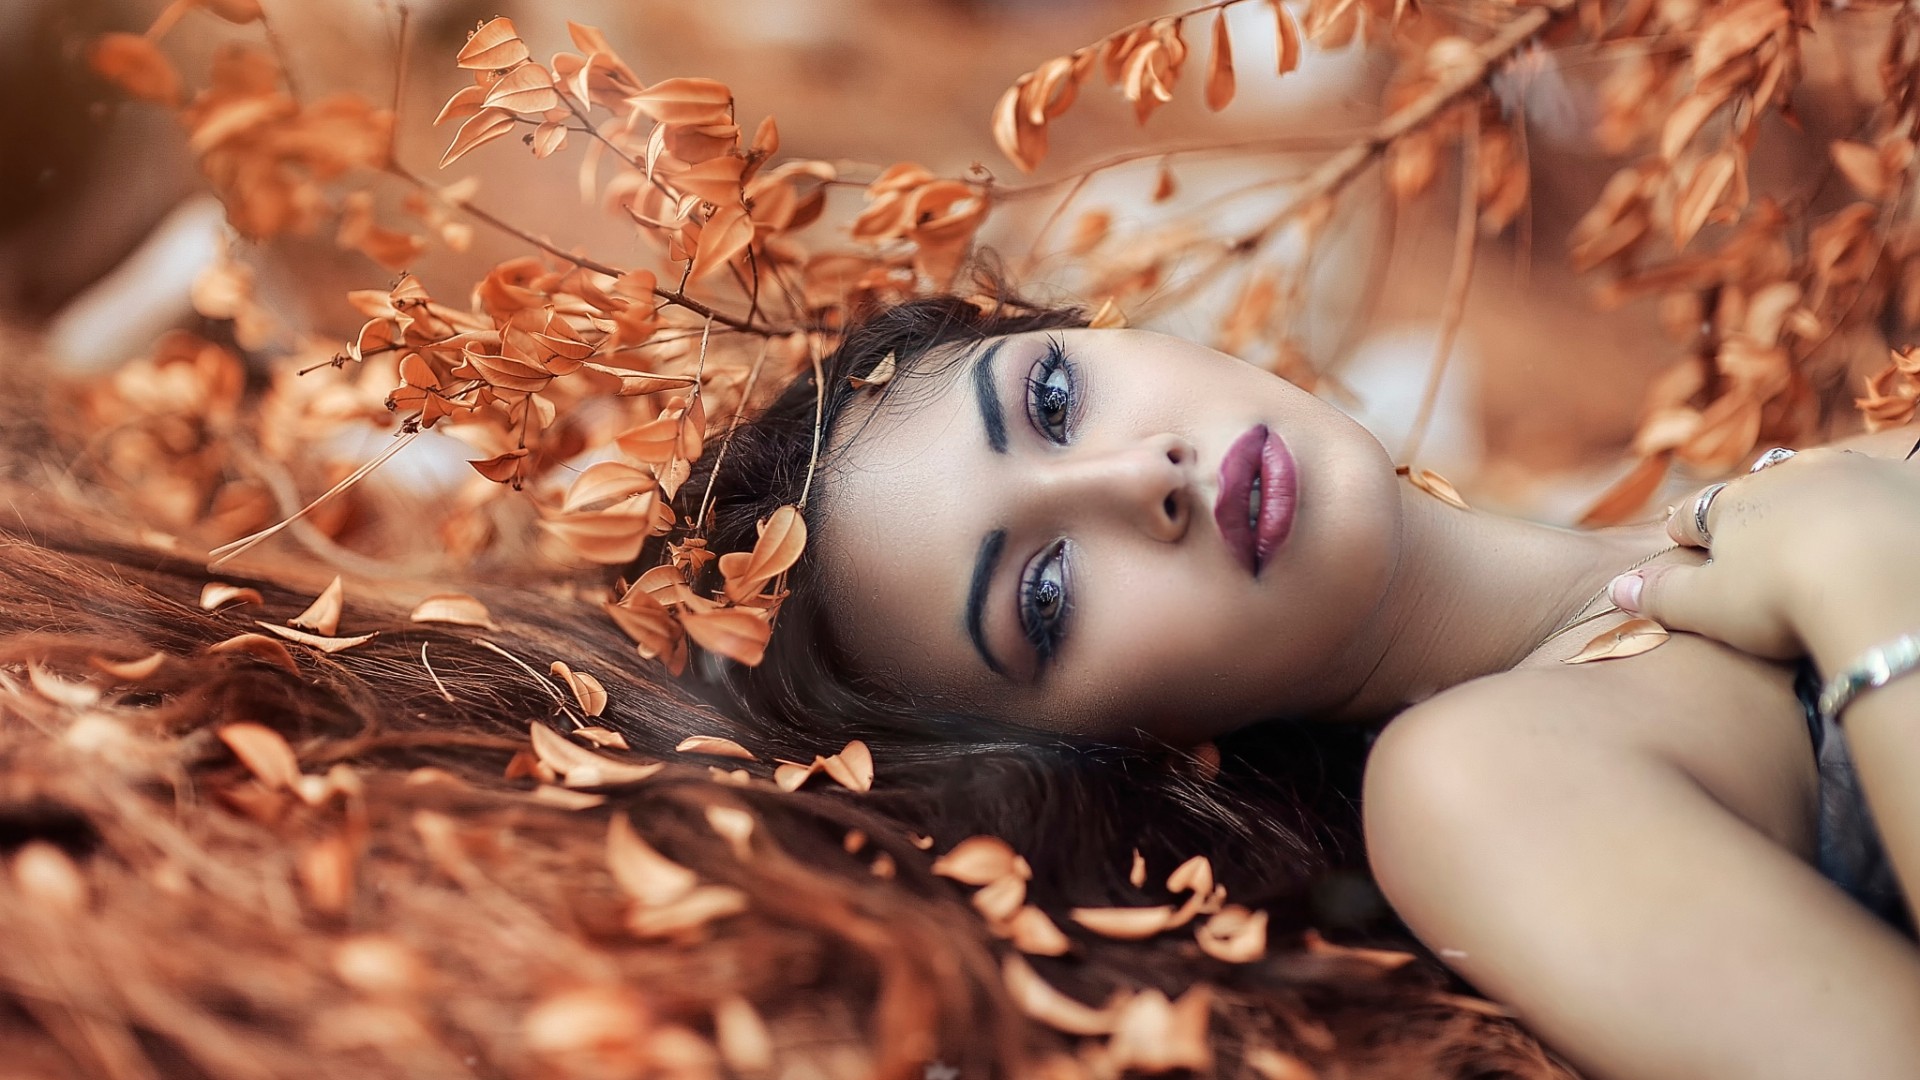 People 1920x1080 women model brunette long hair looking at viewer women outdoors face portrait bare shoulders nature makeup lying on back leaves fall depth of field Alessandro Di Cicco sensual gaze closeup